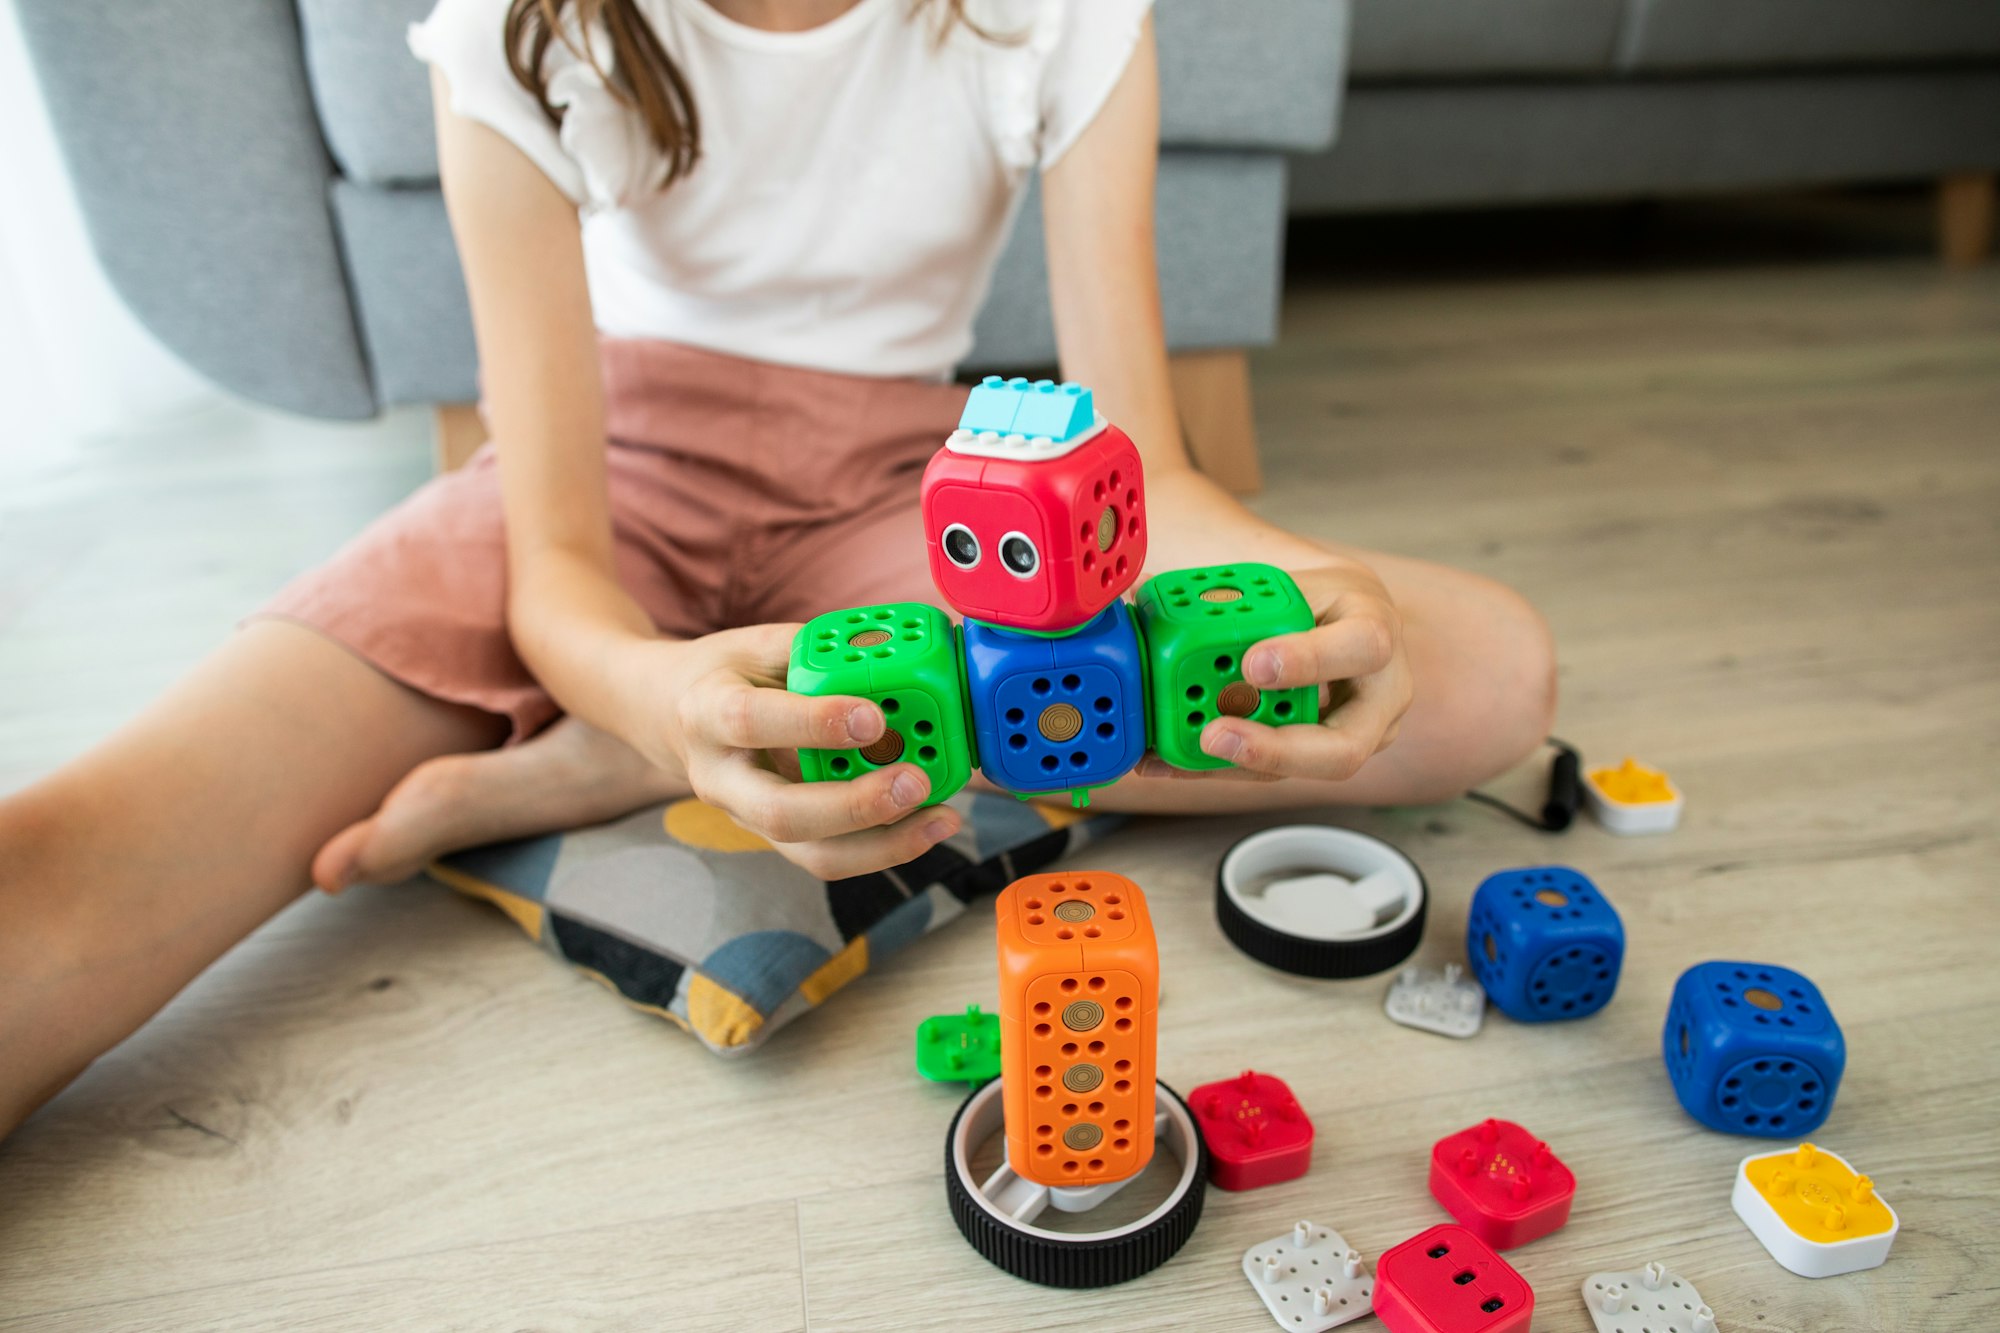 Girl building a toy robot